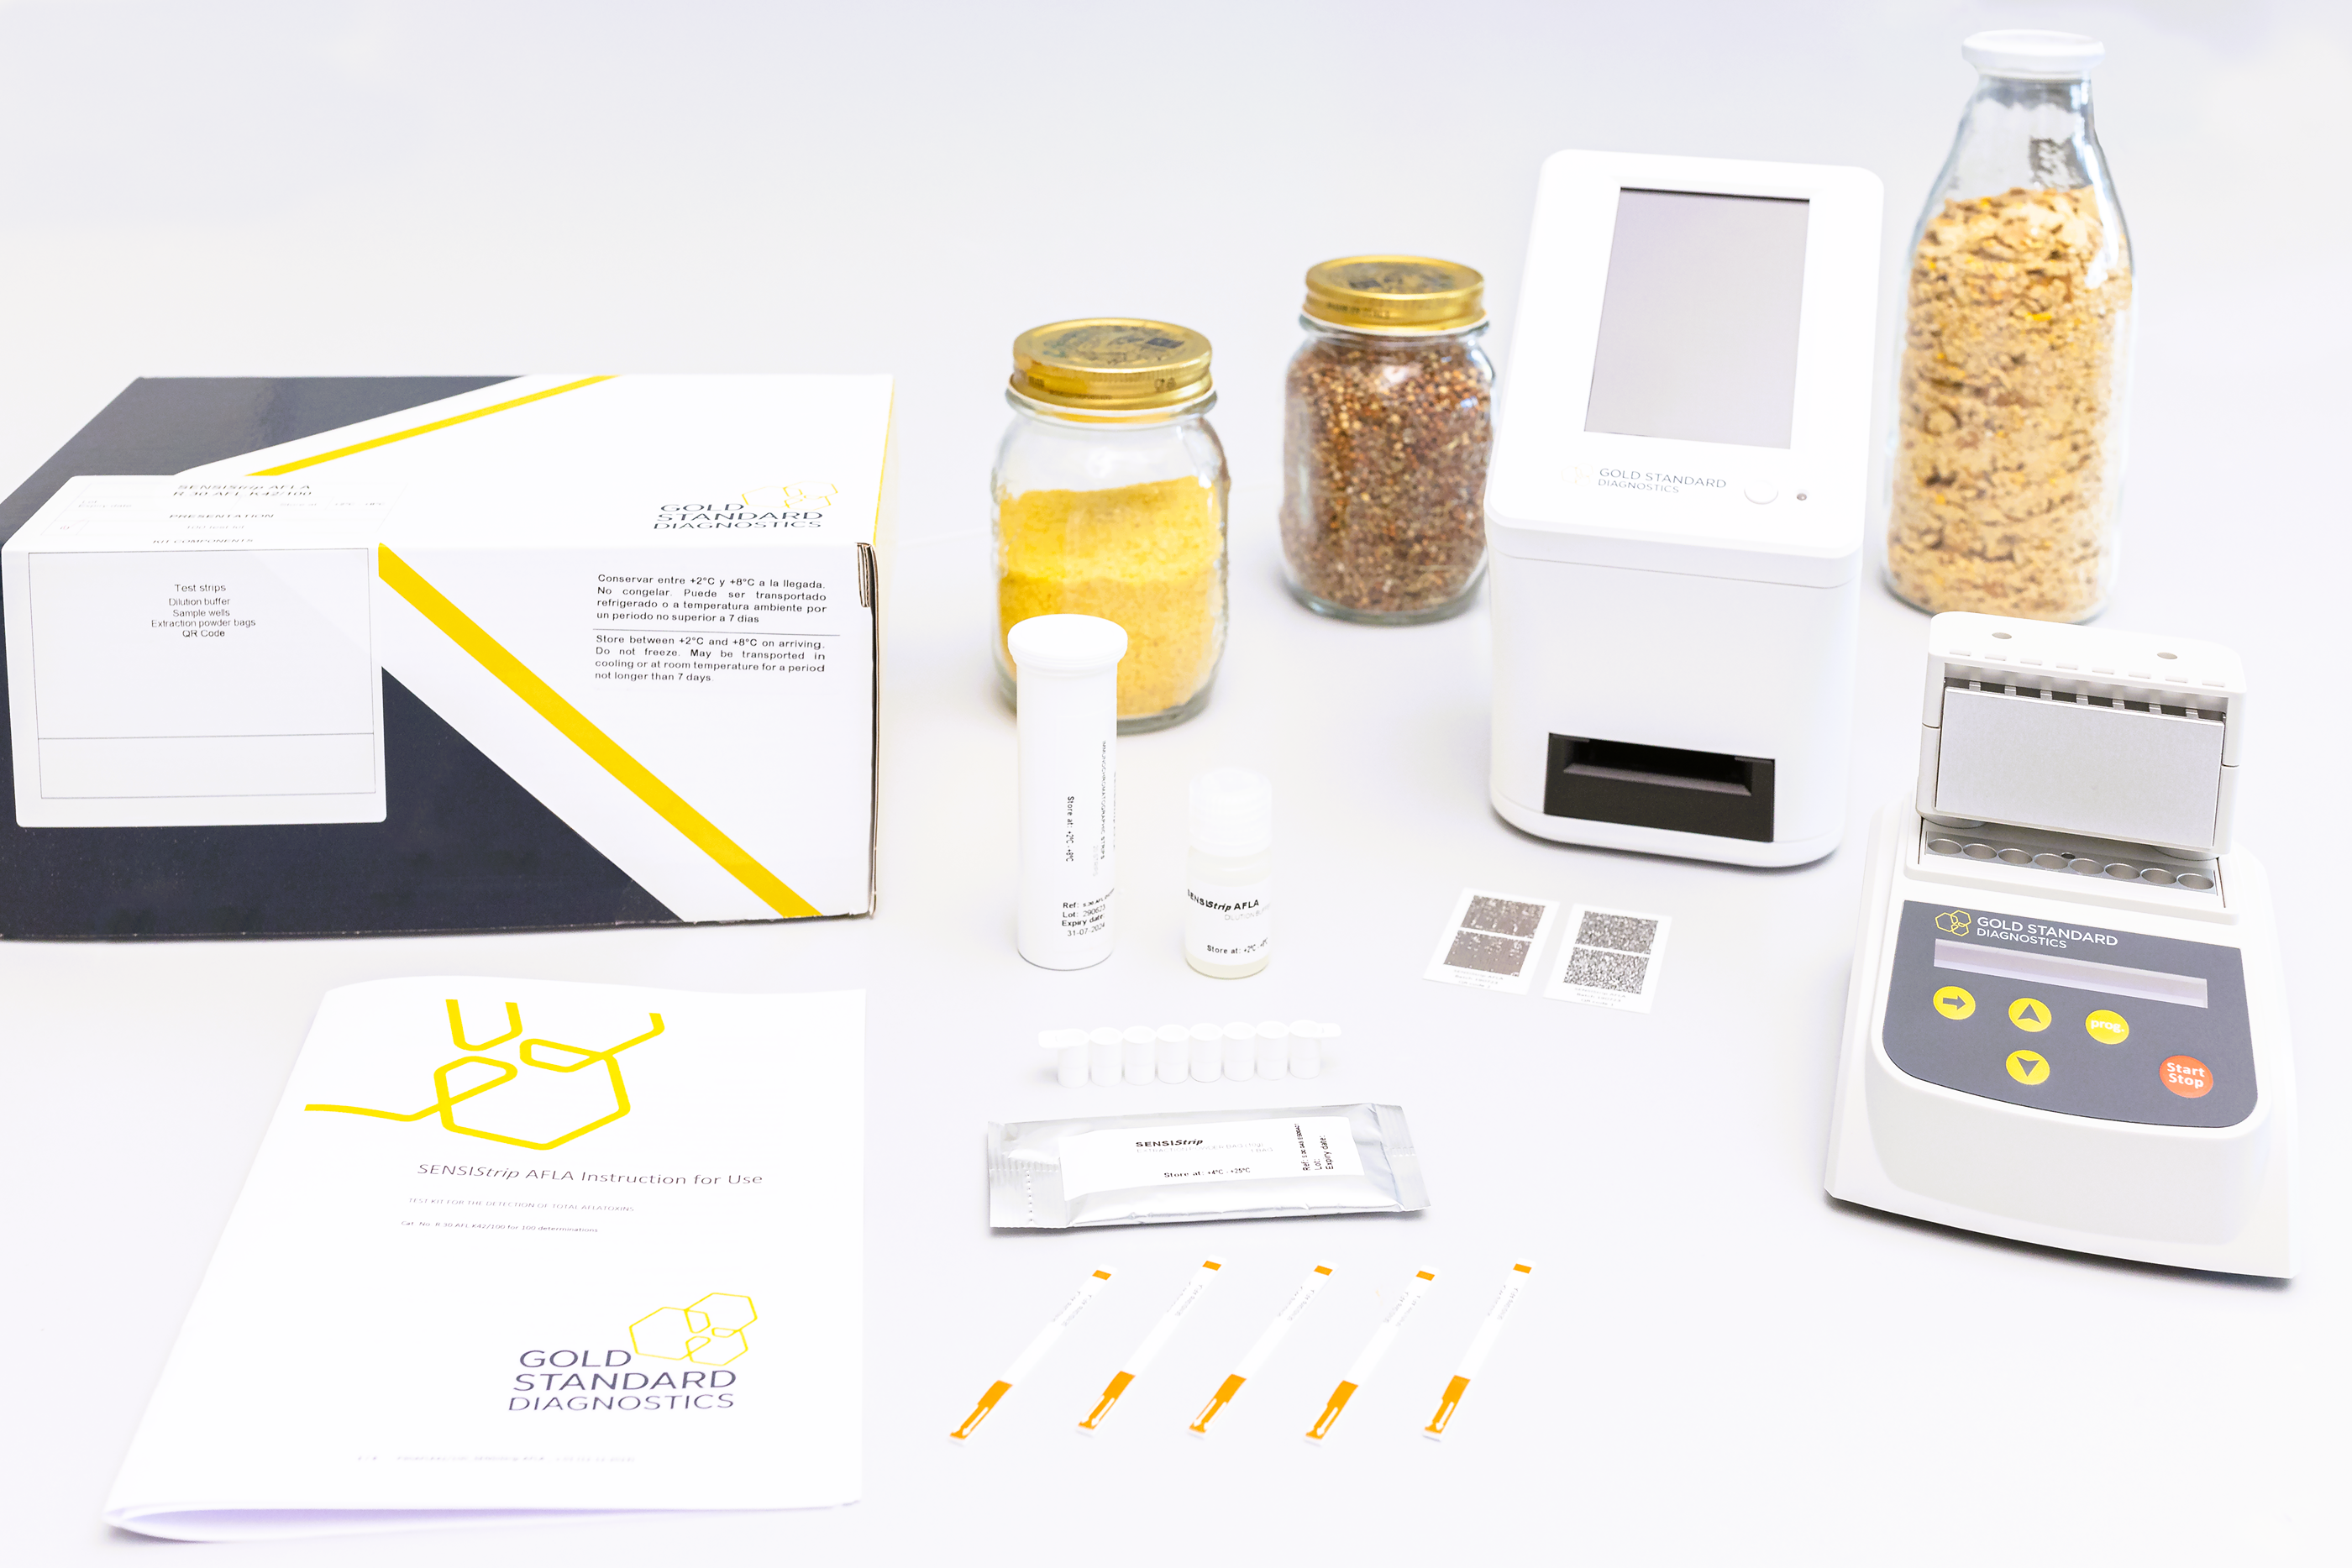 Fast, Accurate and Robust: SENSIStrip is your Field Solution for Rapid Mycotoxin Analysis!